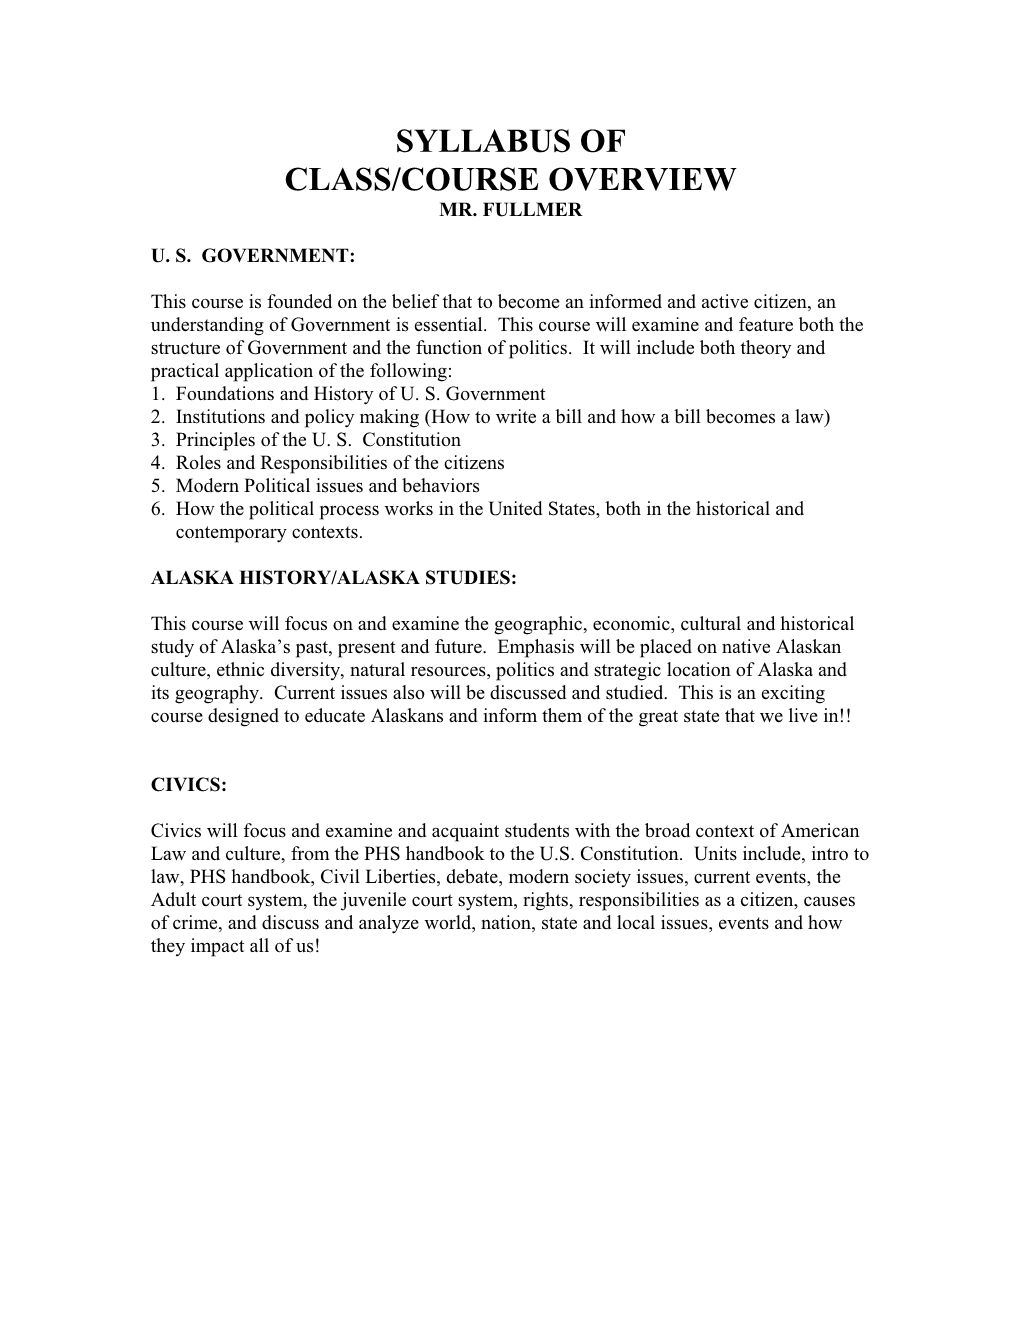 Class/Course Overview